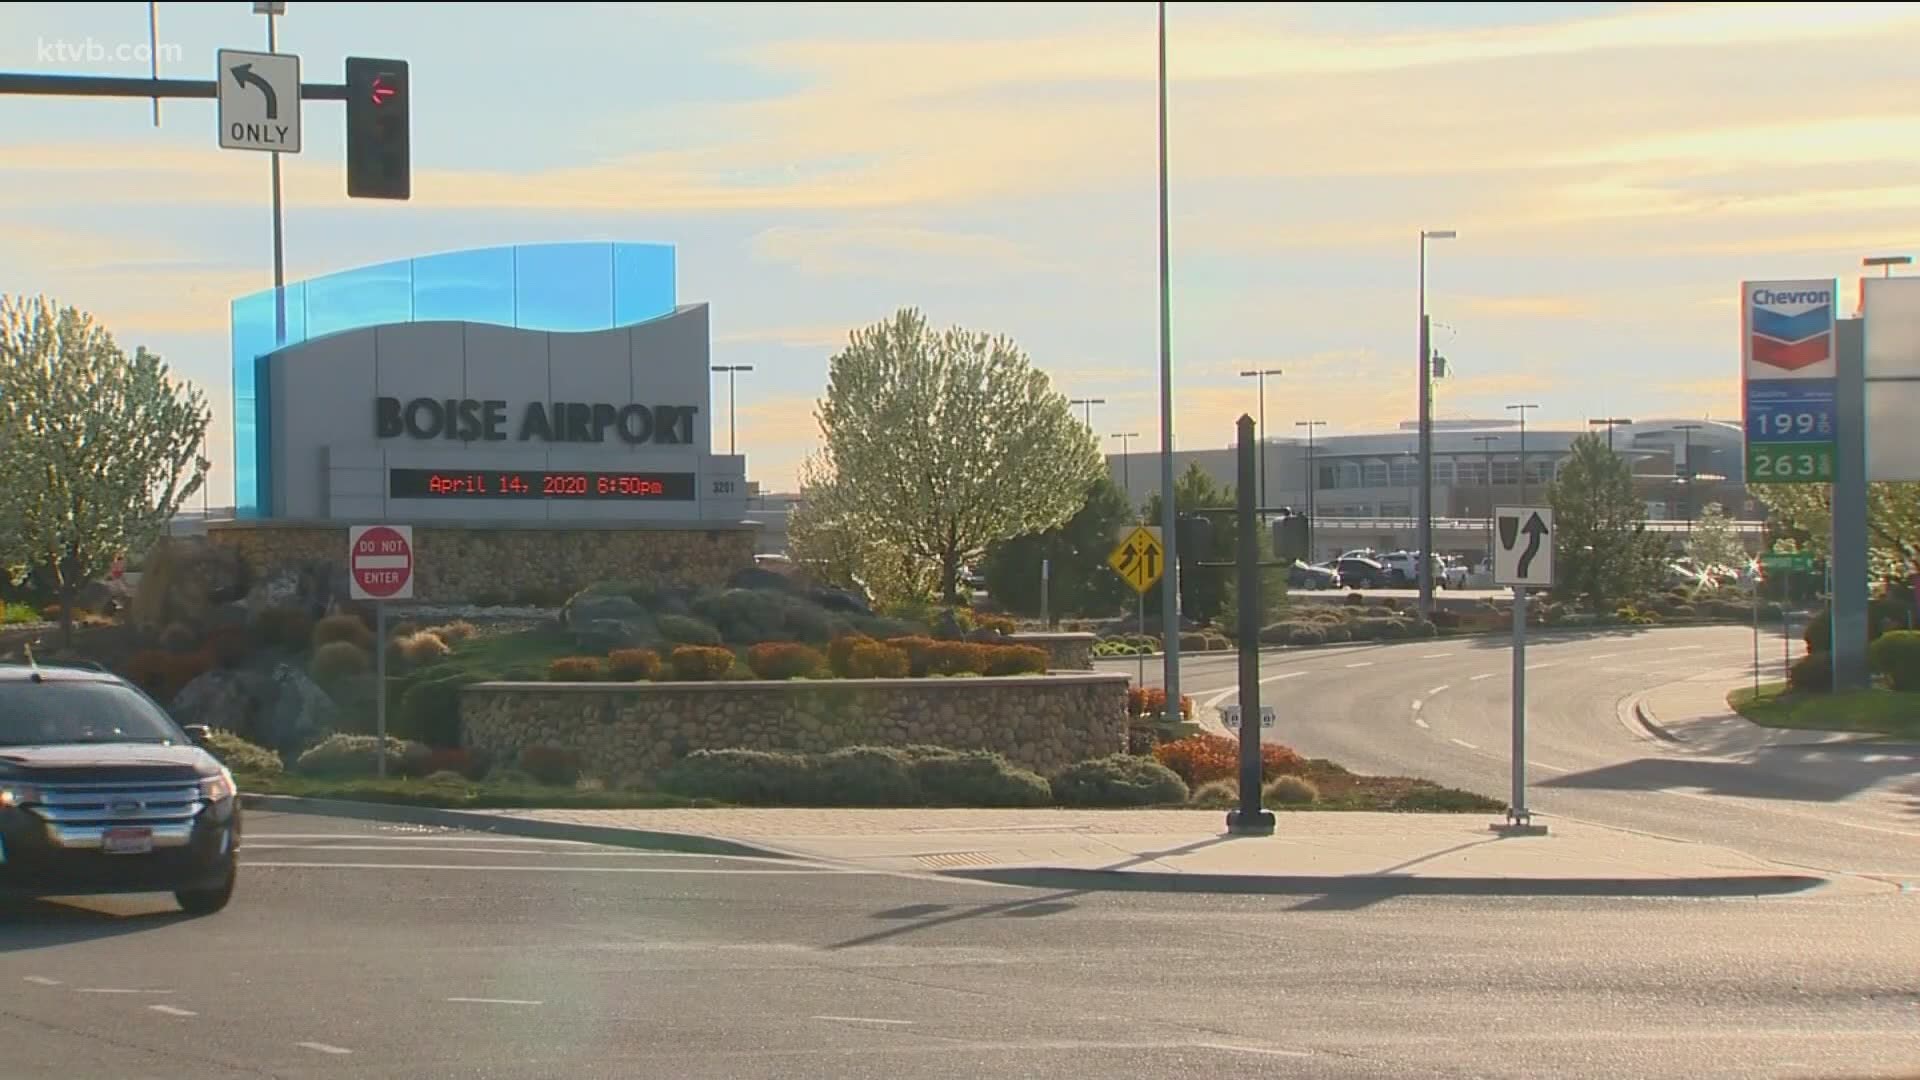 The addition of the new service brings the total number of nonstop flights out of Boise to 27.